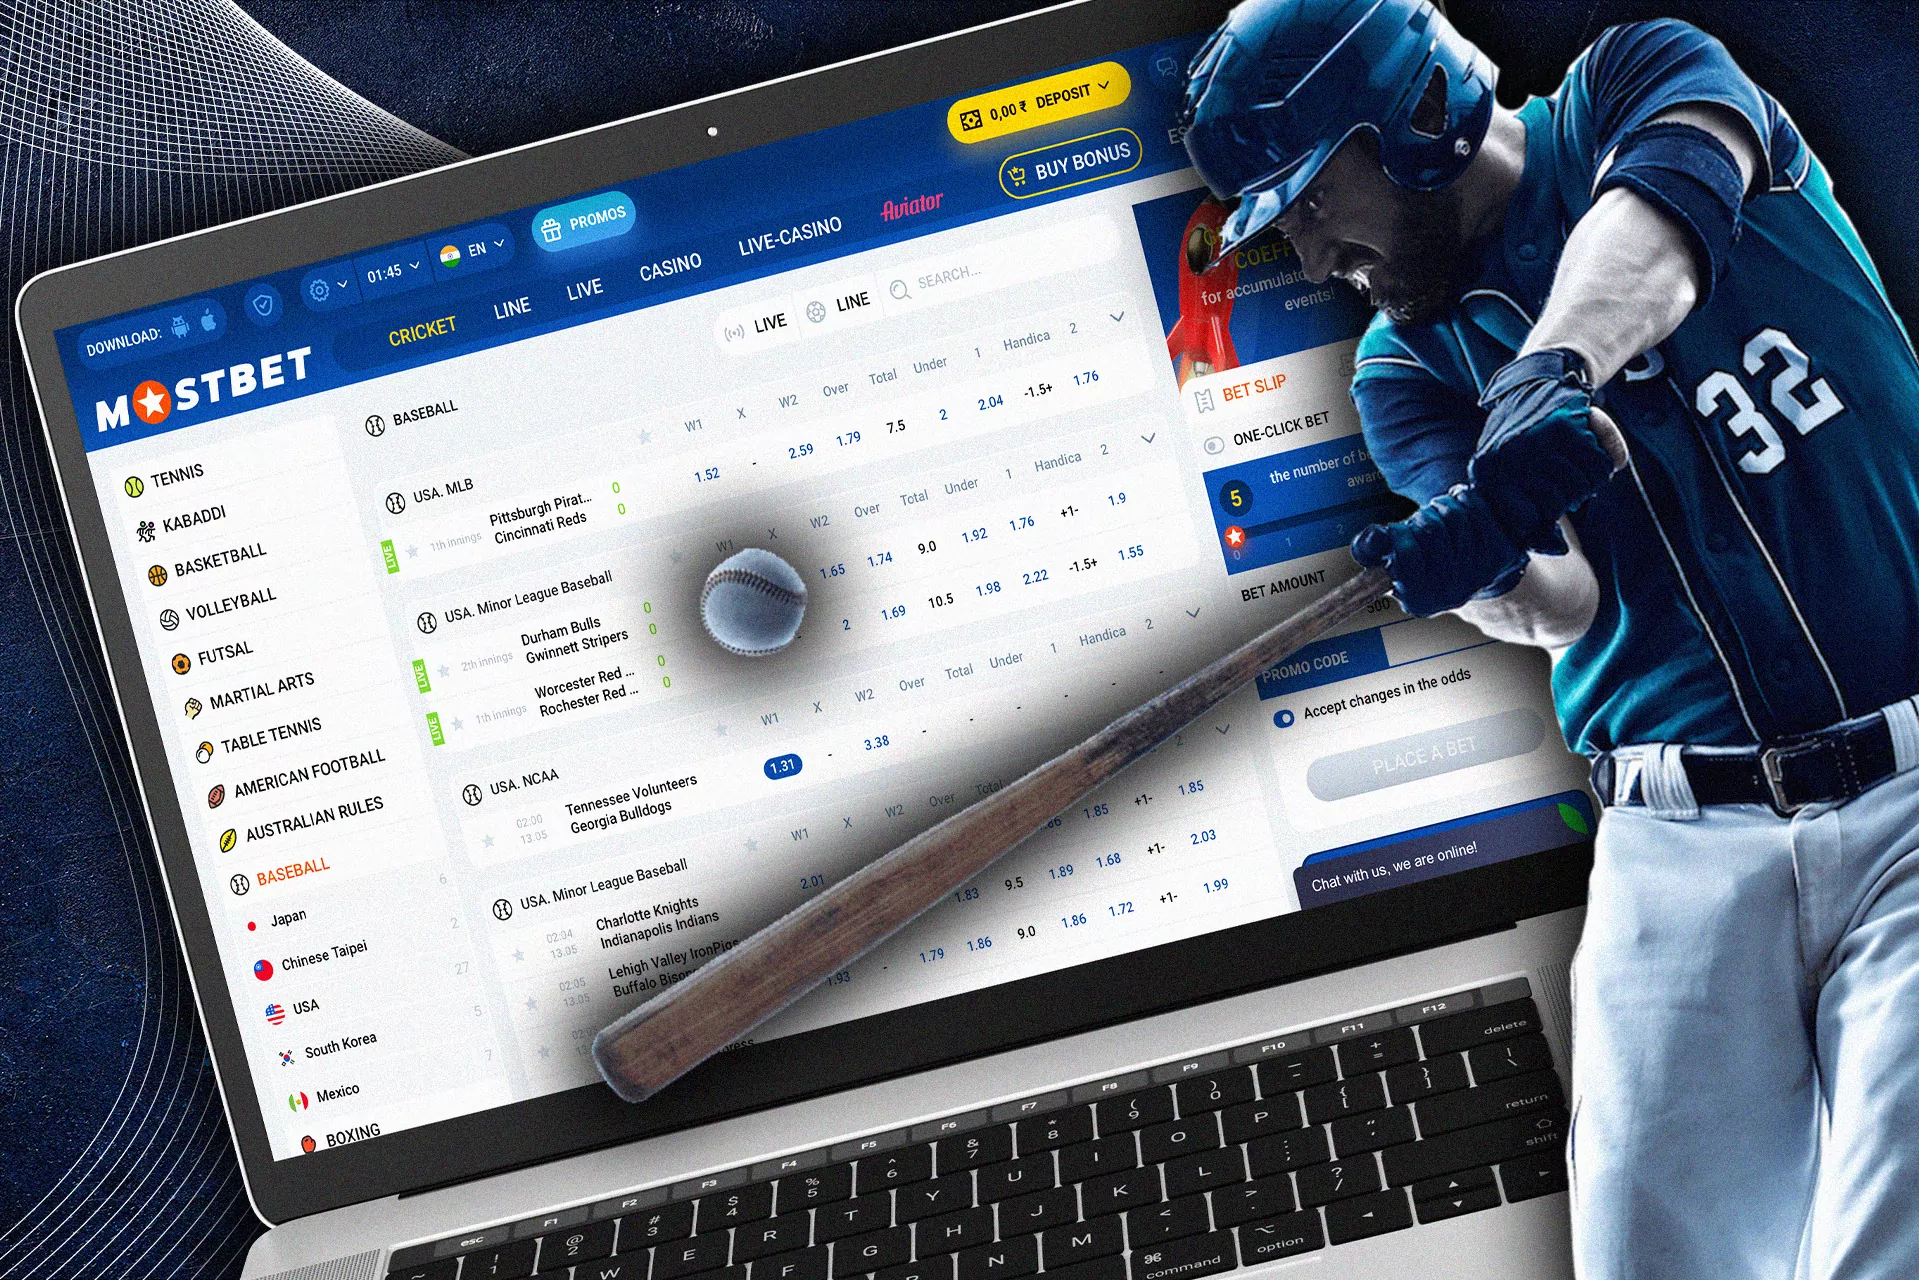 Plaсe bets on your favorite baseball matches with Mostbet.